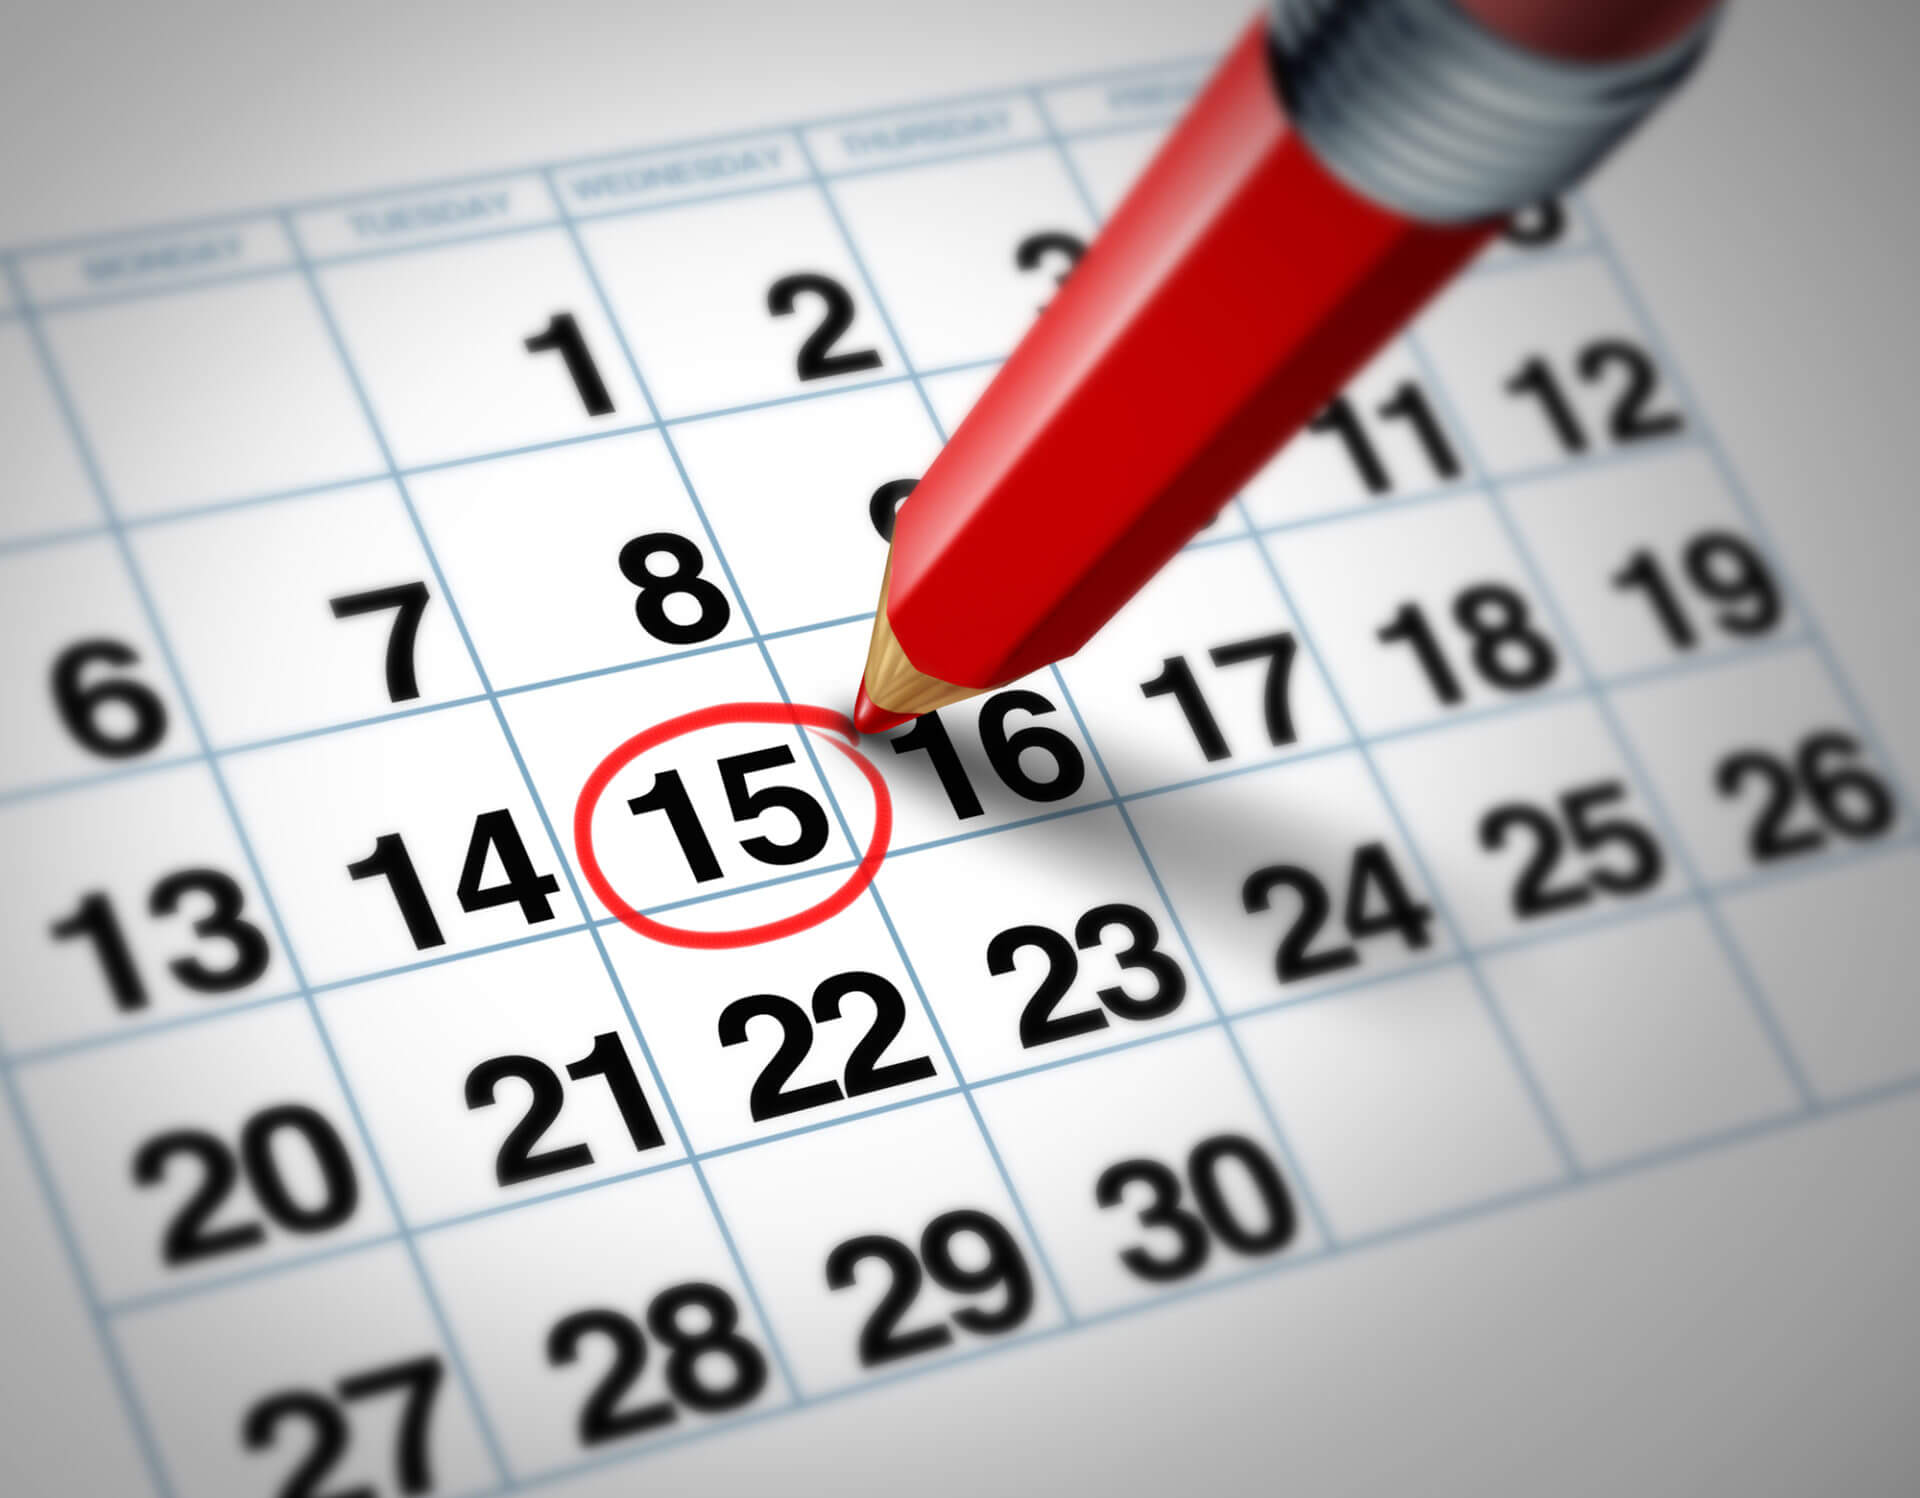 choosing a pick up date for your auto transport